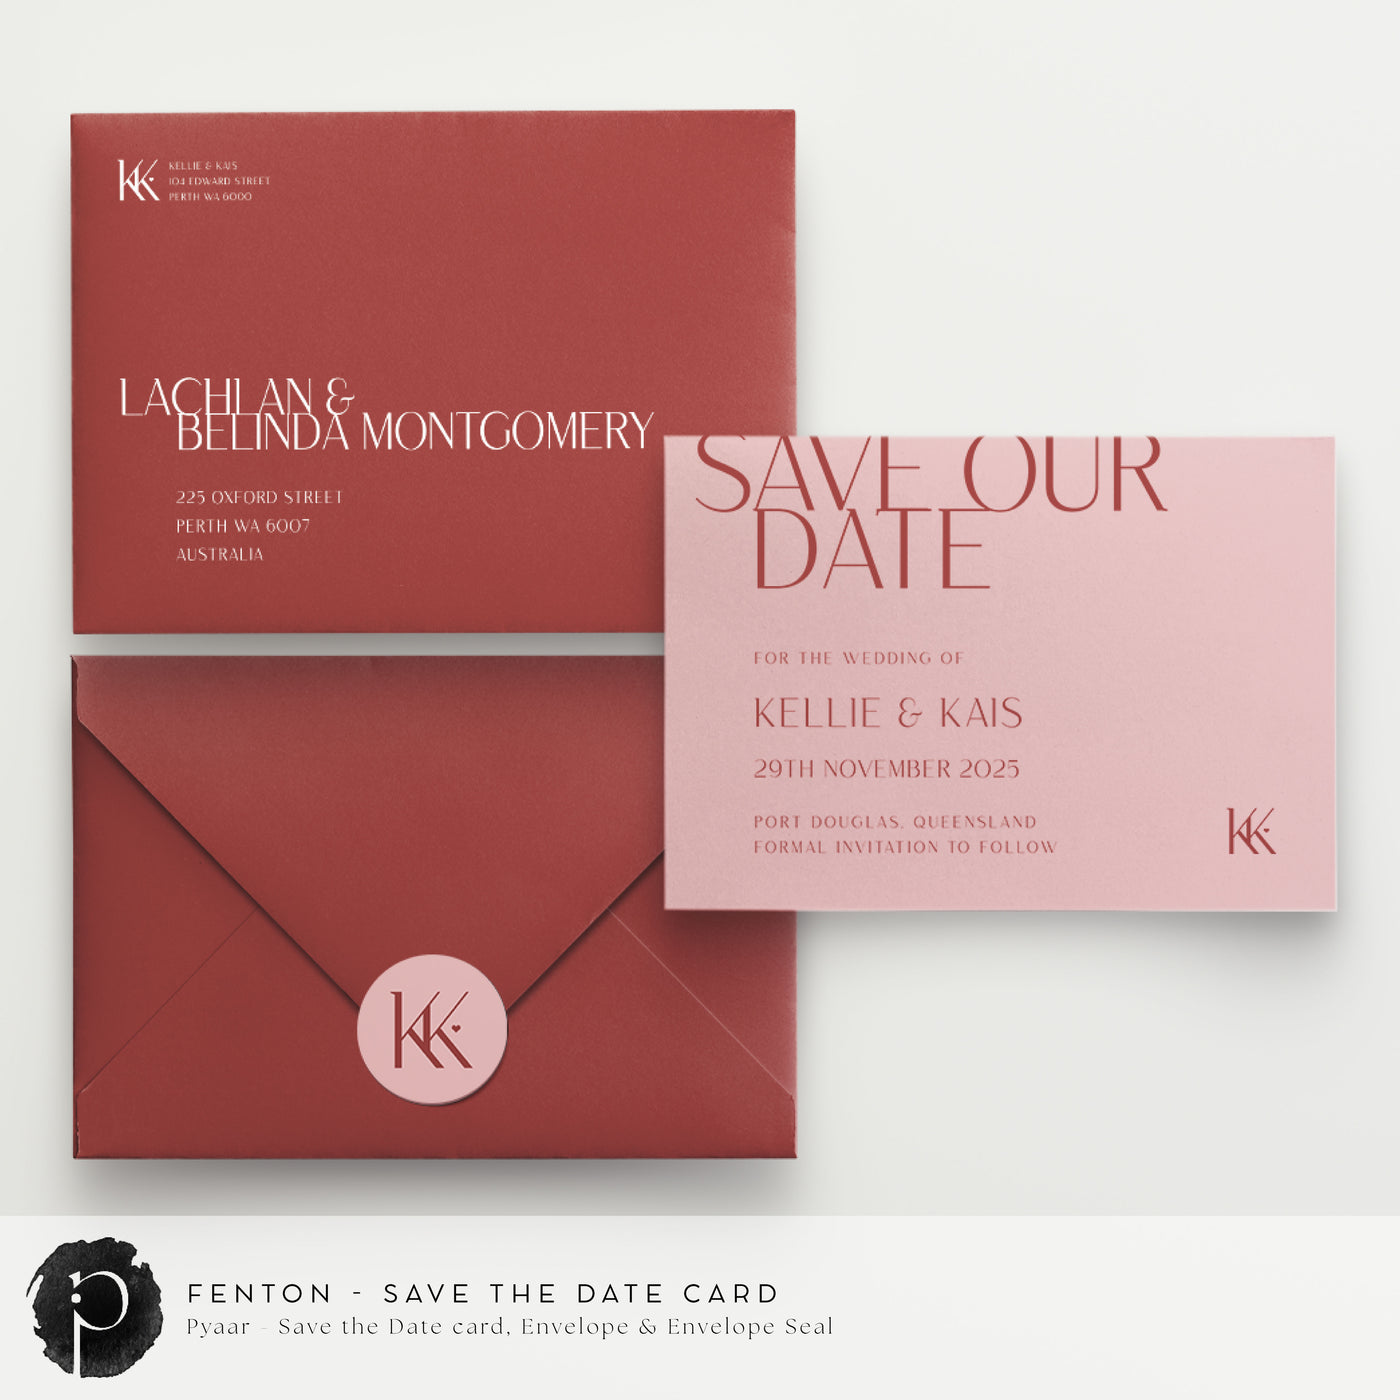 Fenton - Save The Date Cards